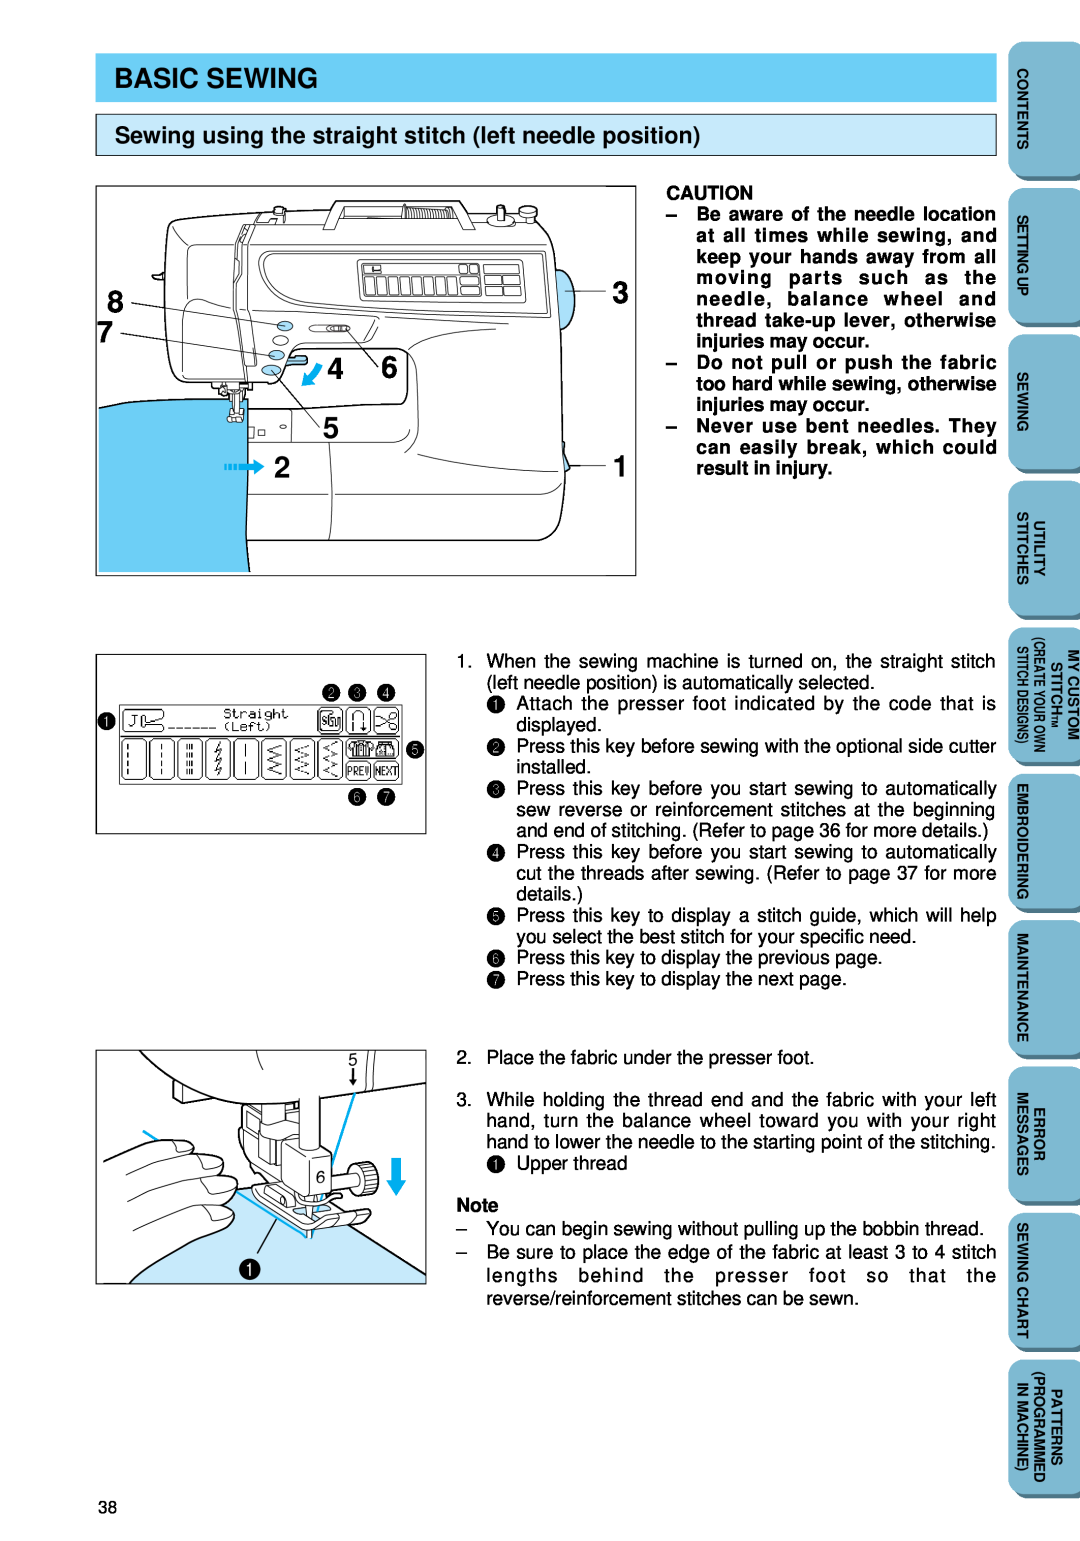 Brother PC 6500 Basic Sewing, Sewing using the straight stitch left needle position, Be aware of the needle location 